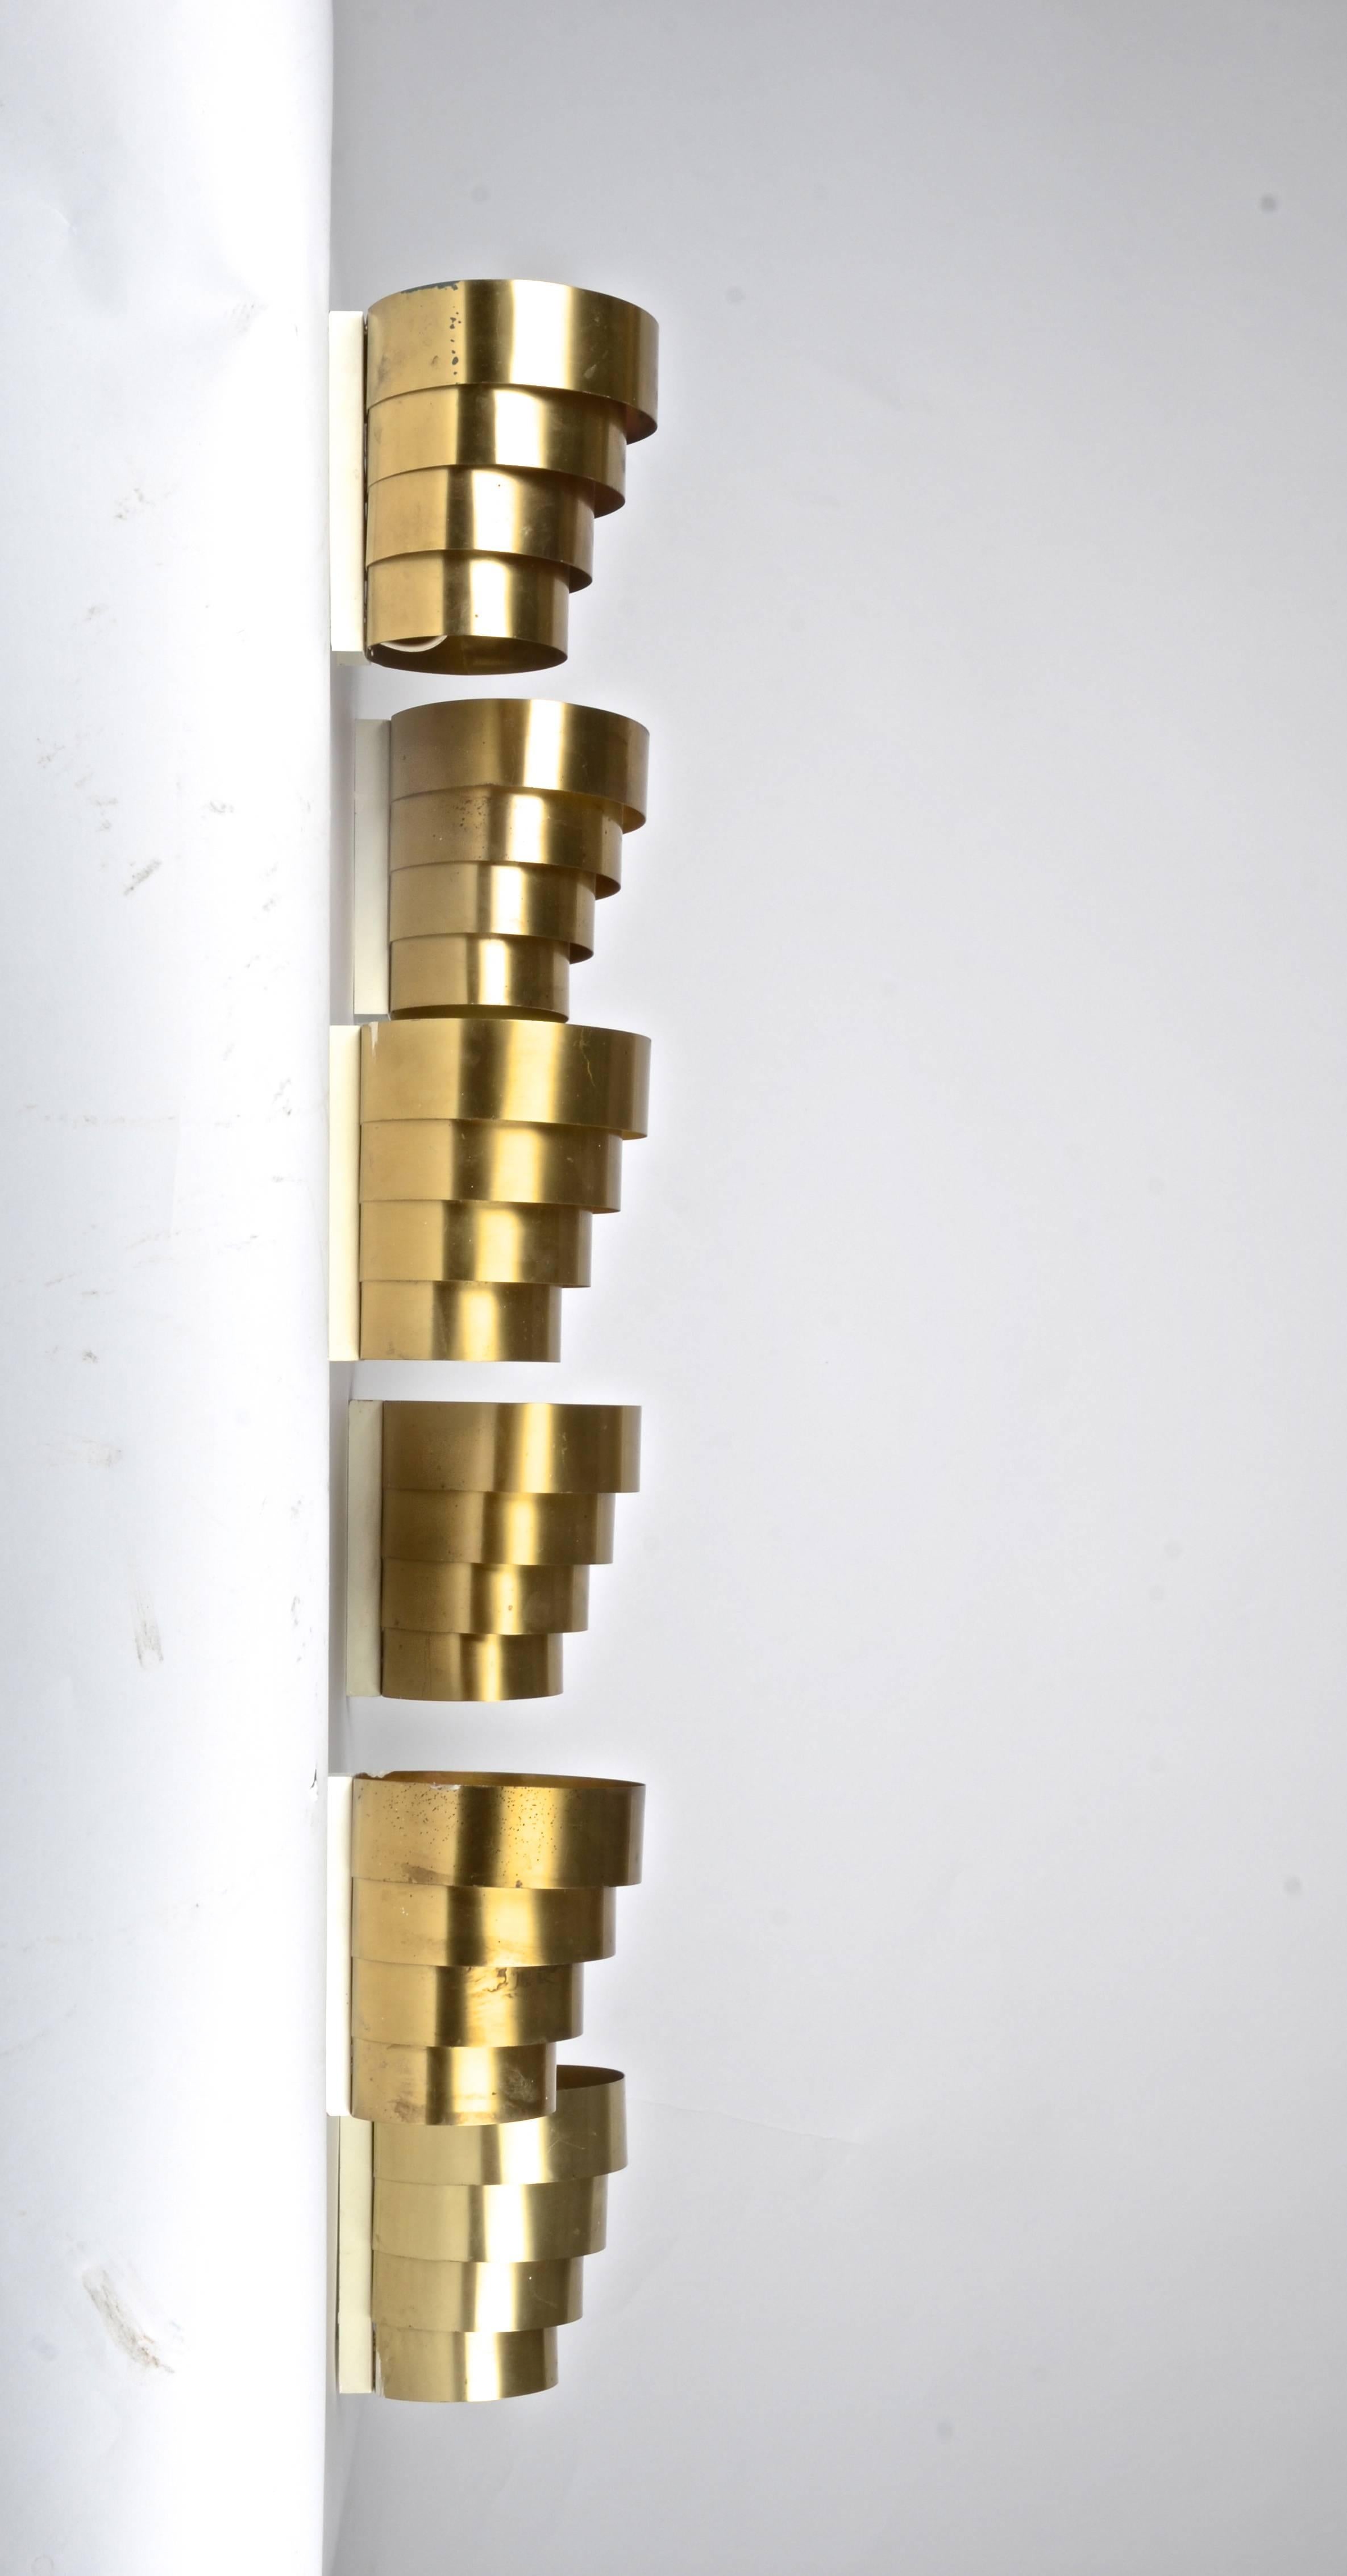 Brass sconces by Hans-Agne Jakobsson for Markaryd, designed in the 1960s. Brass sheet, partly painted white.

Six are available. 